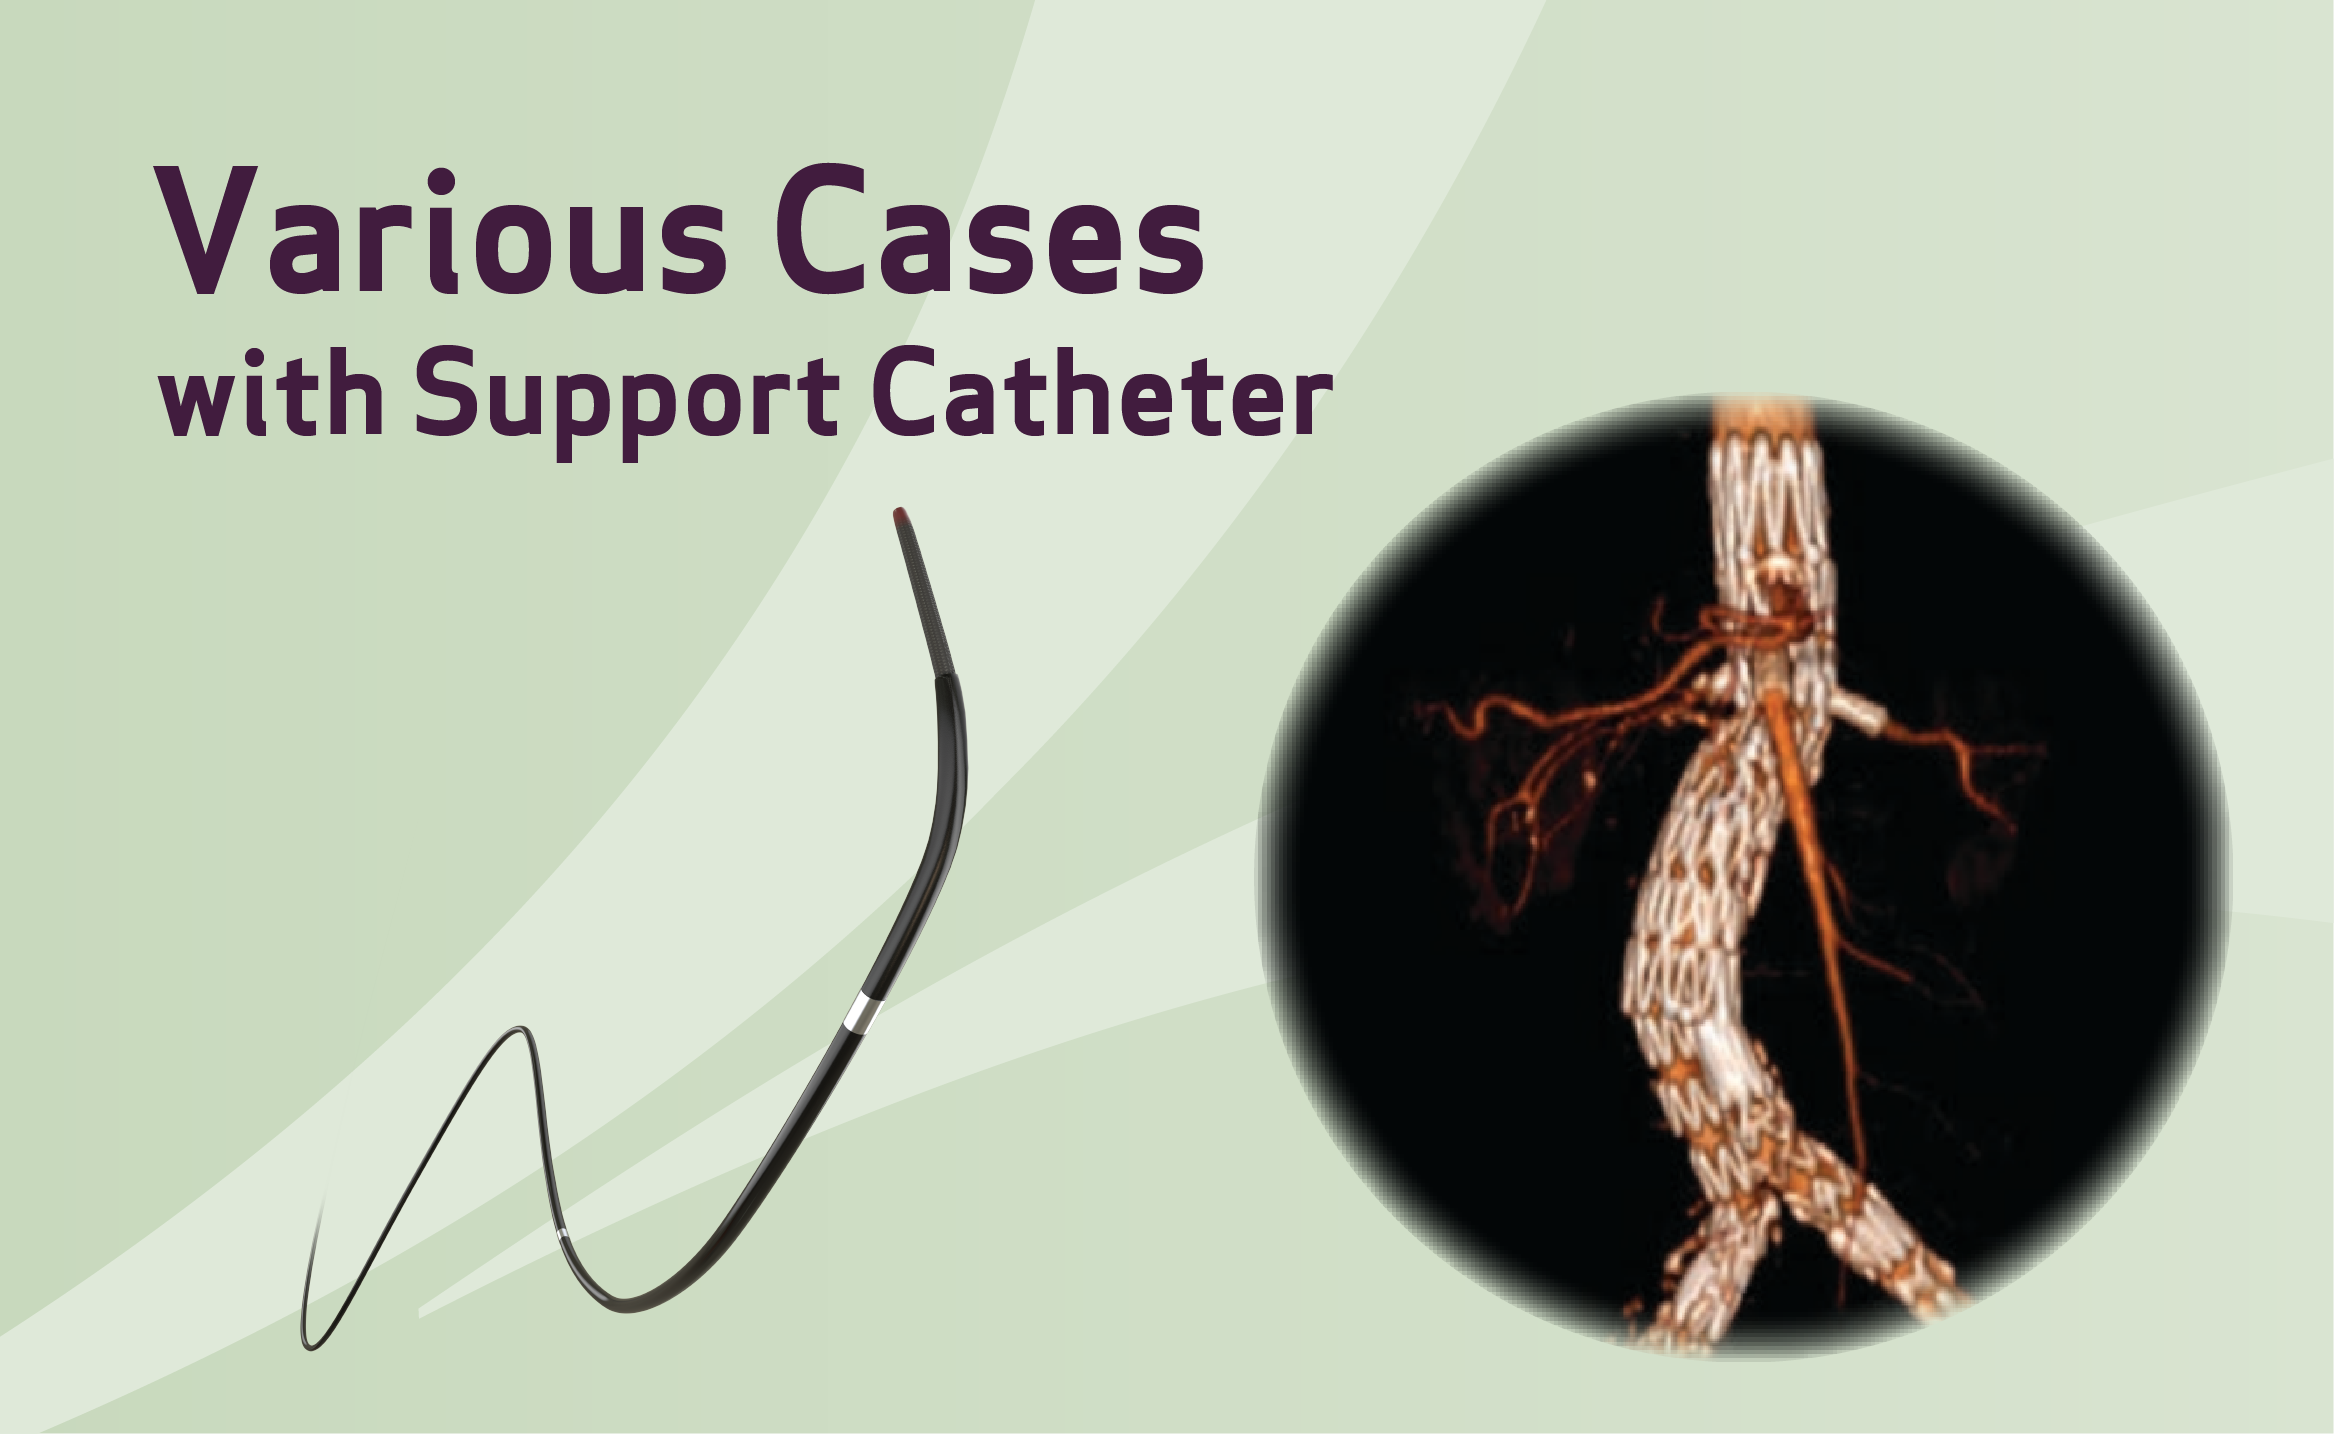 Case report of various cases with support catheter